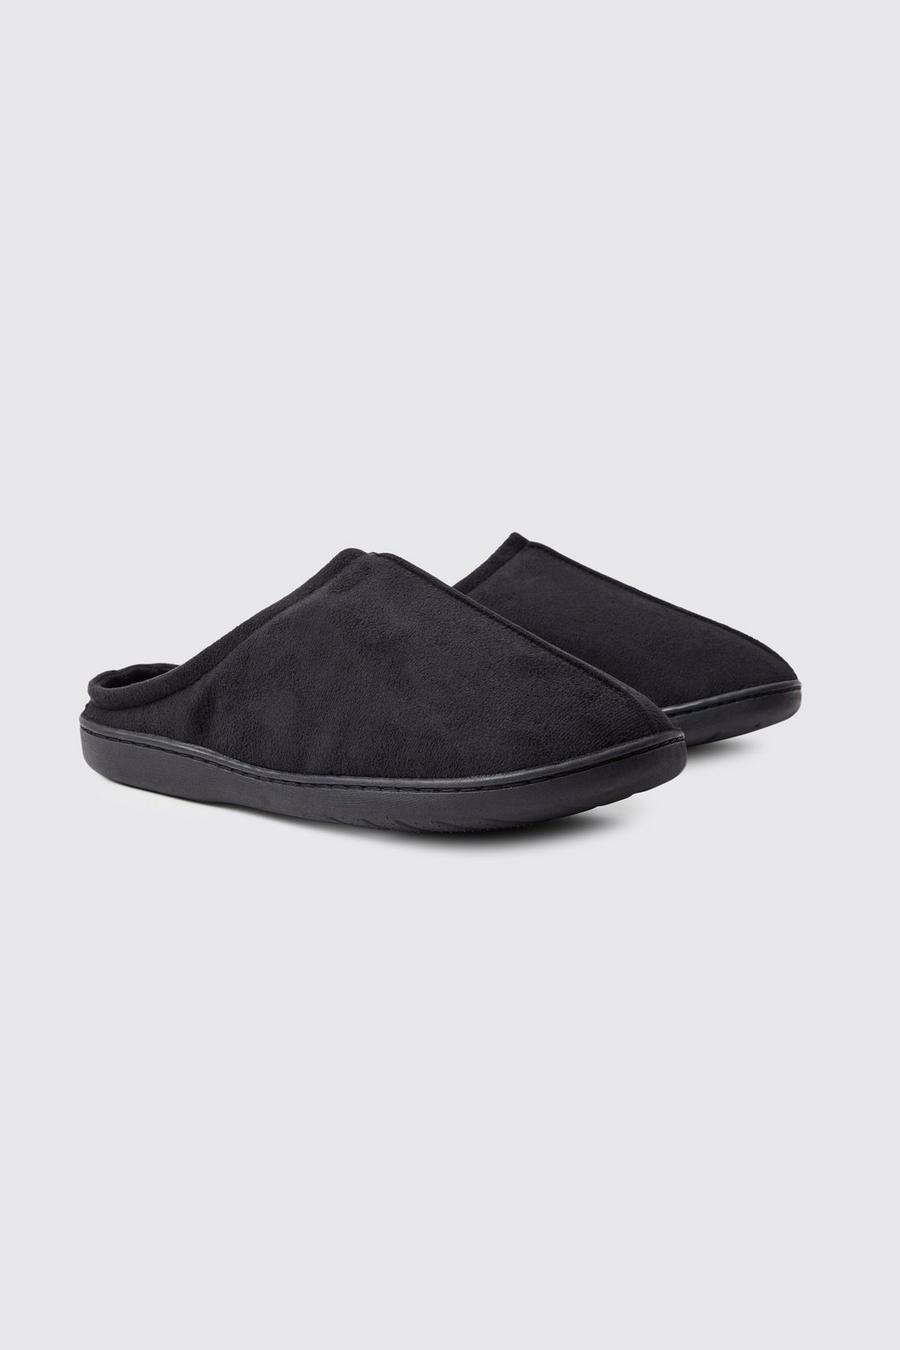 Black Faux Suede Mule Slippers image number 1